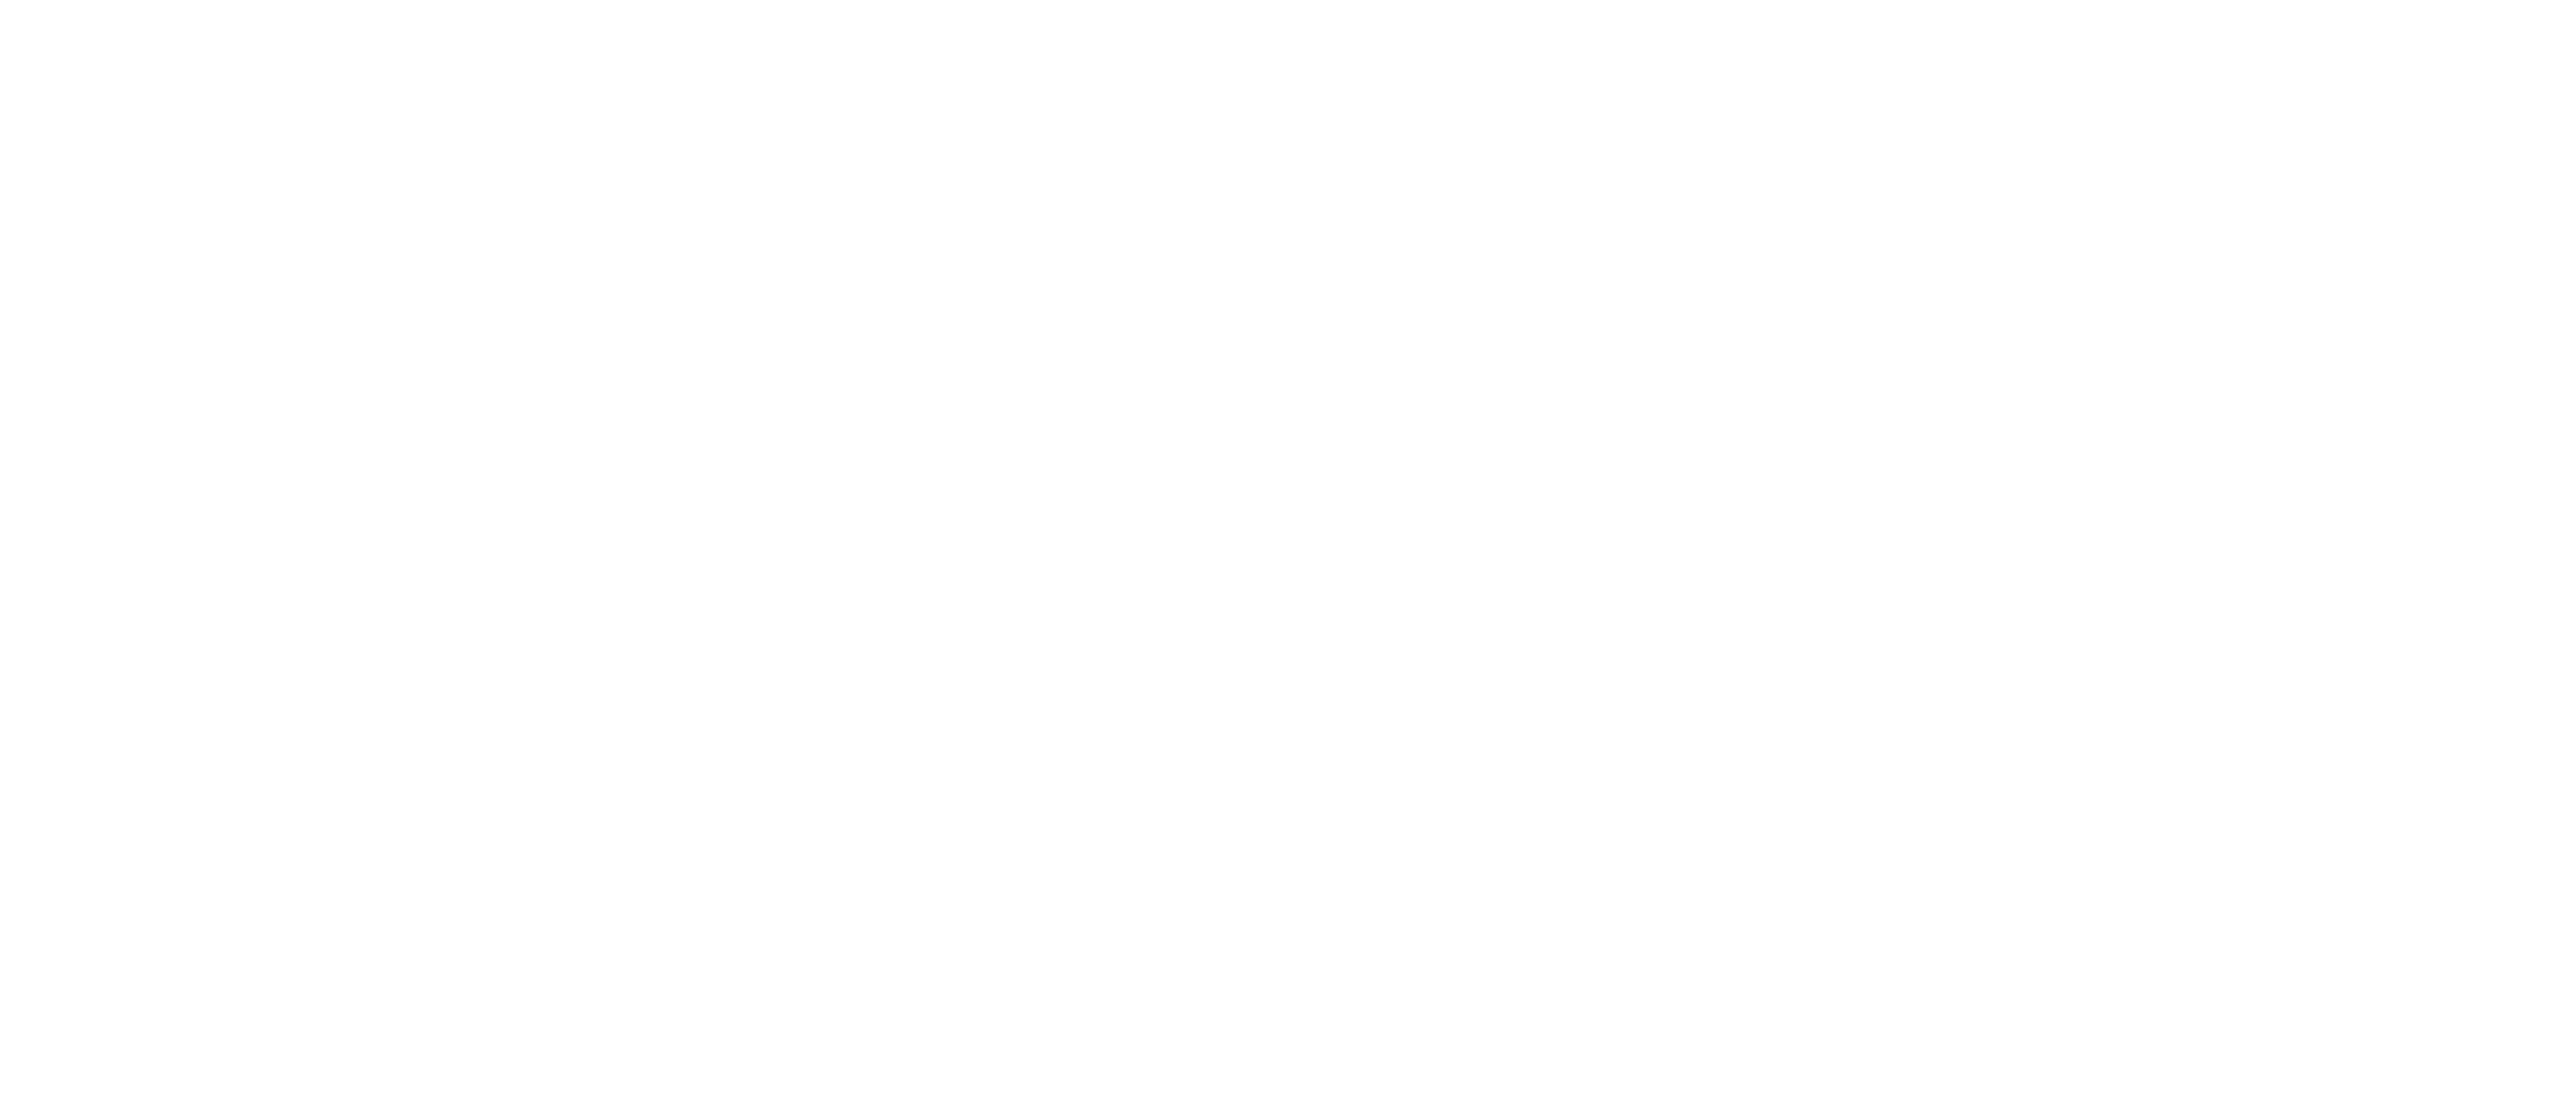 Elder Law and Special Needs Law Firm